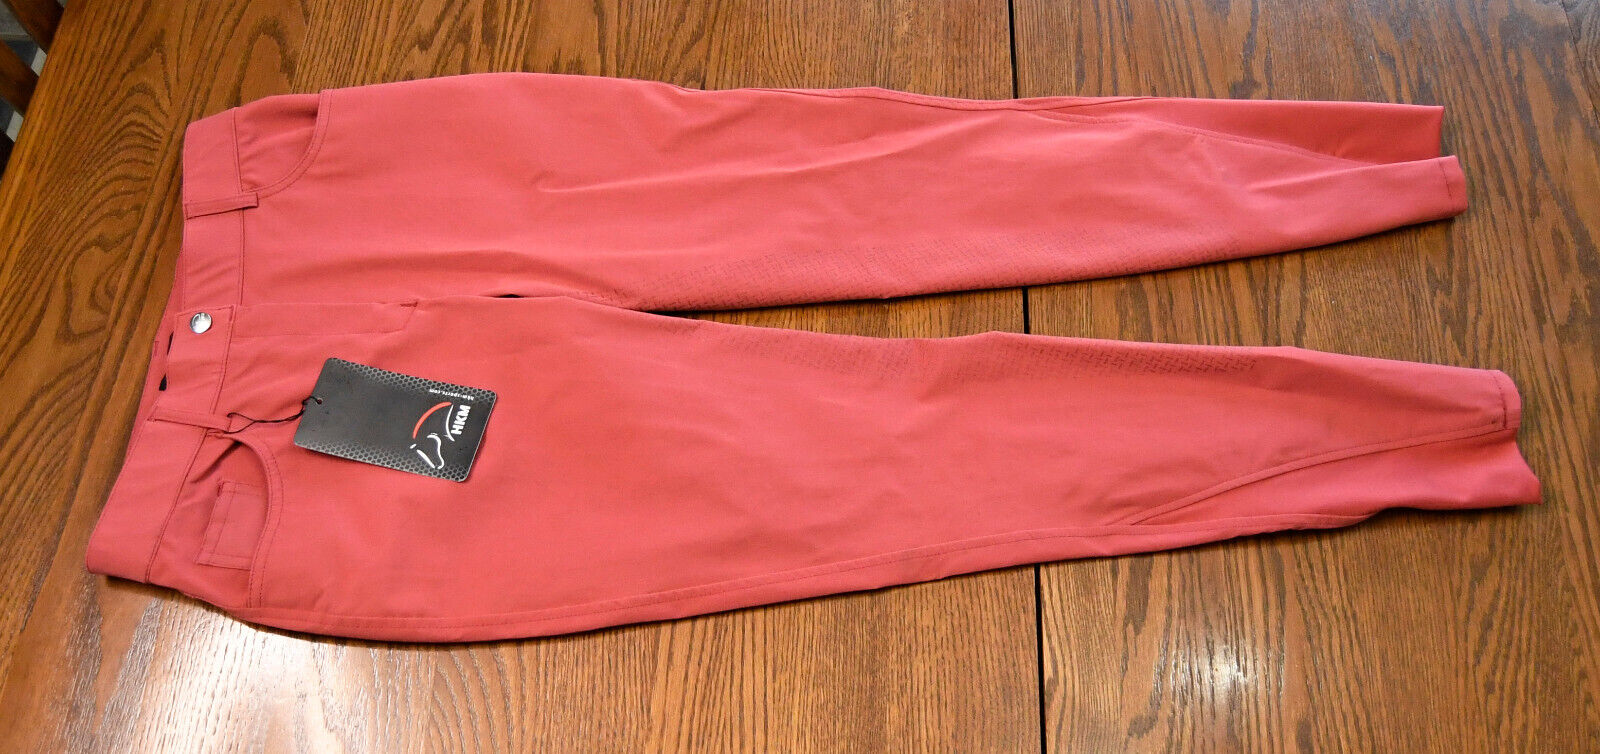 HKM, New, Sunshine silicone full seat breeches, red, 26, MSR